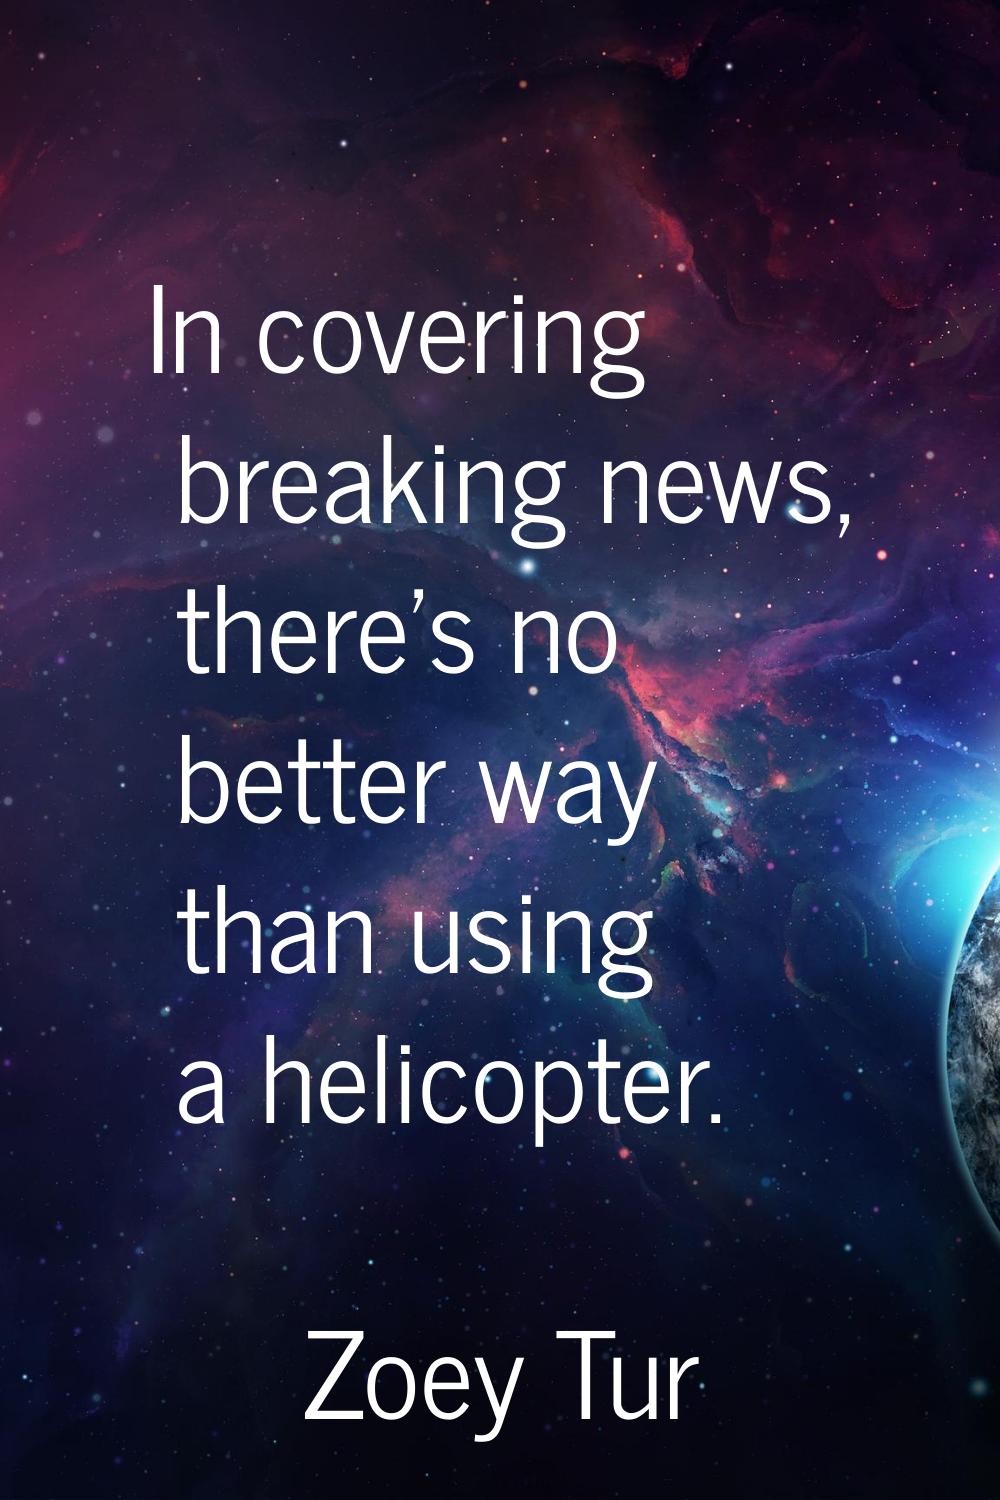 In covering breaking news, there's no better way than using a helicopter.